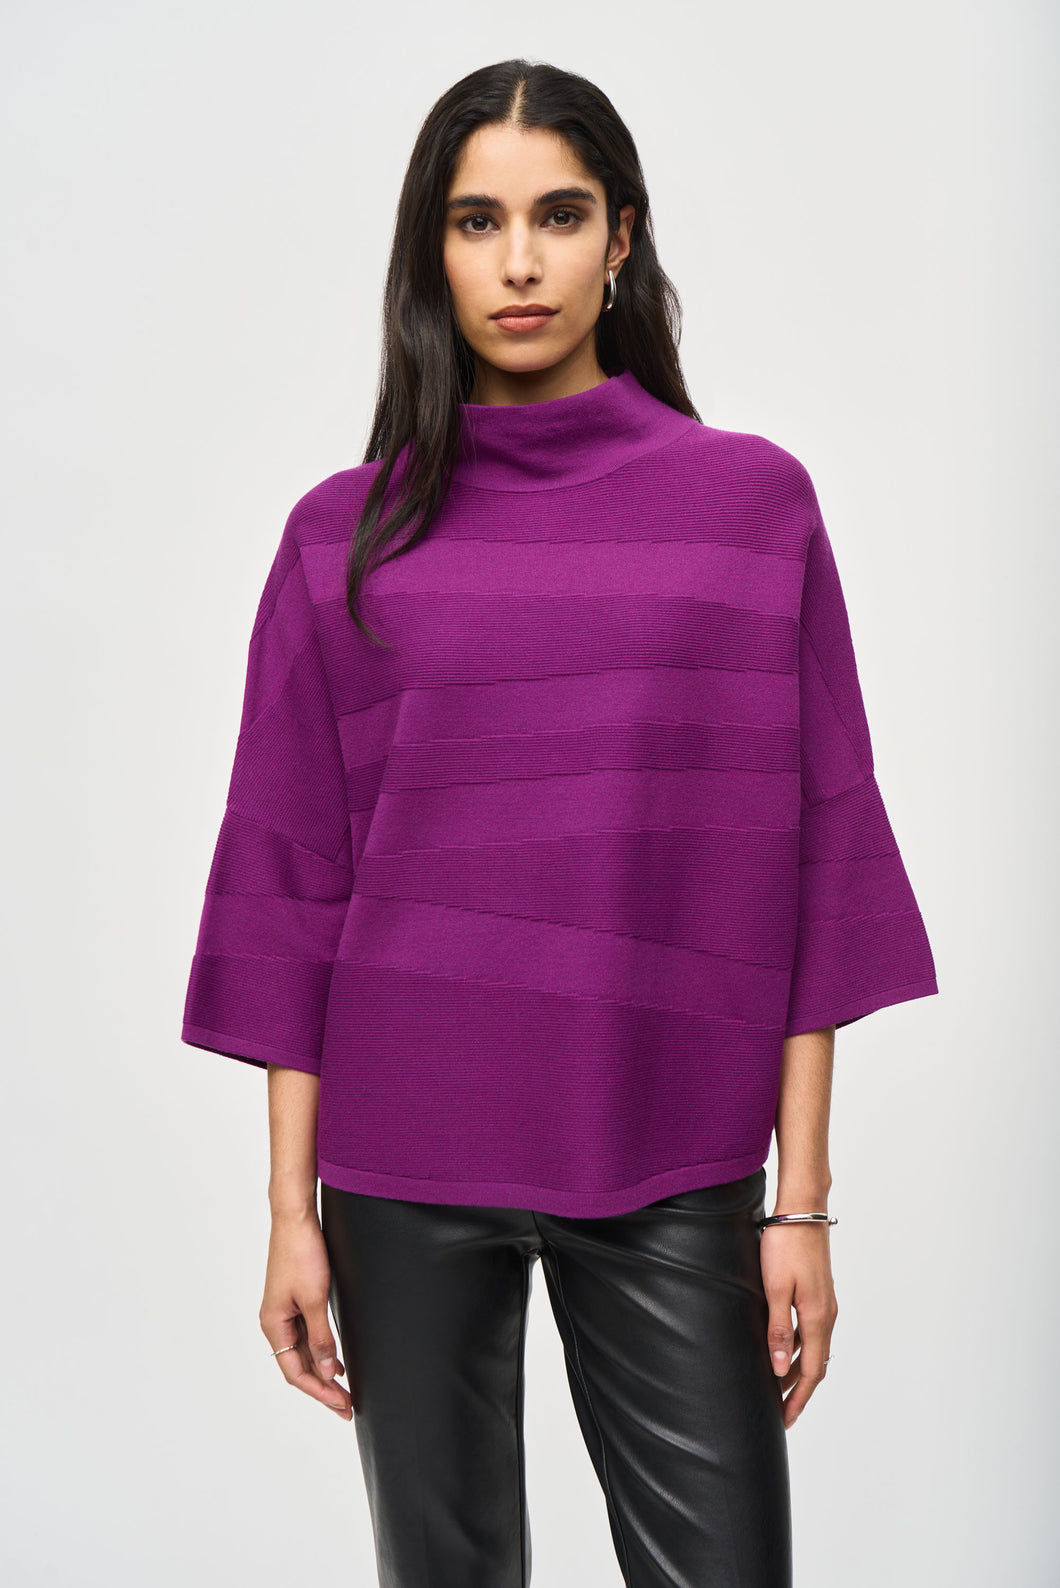 Sweater Knit Mock Neck Boxy Top by Joseph Ribkoff (available in plus sizes)